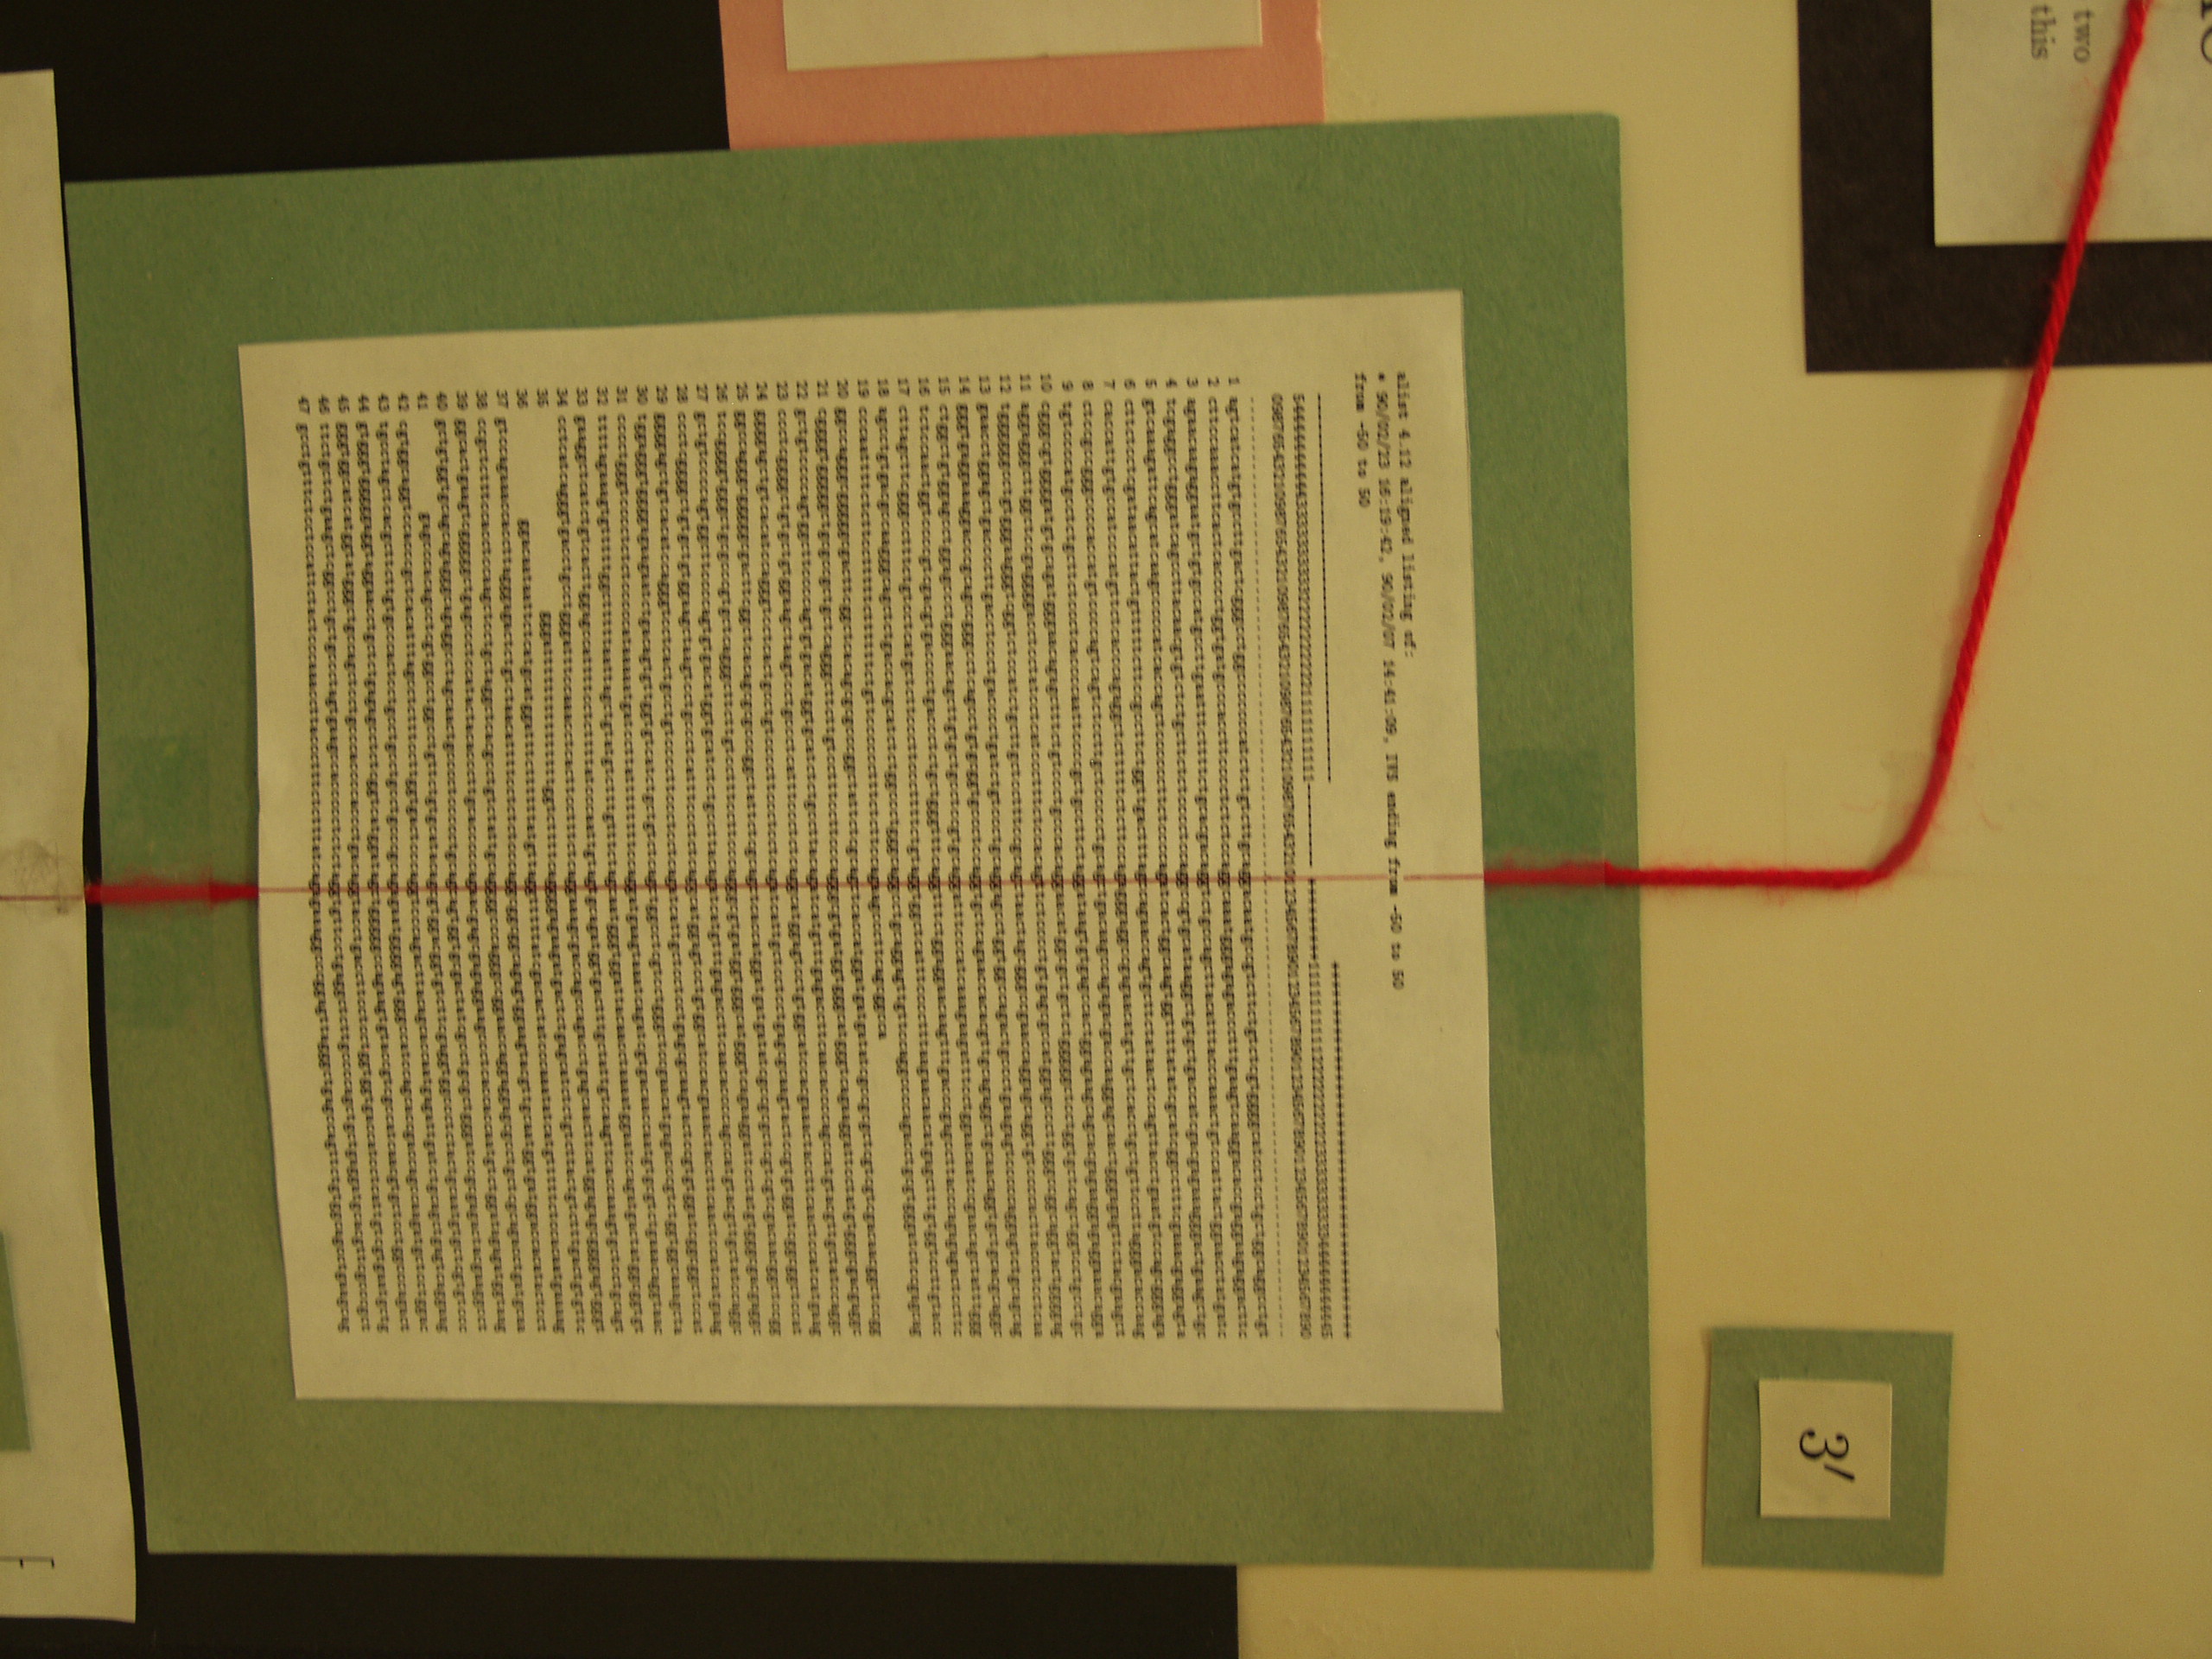 P8237797.JPG Photograph of Mike Stephen's 1990 science fair poster 'Information analysis of RNA splice sites'